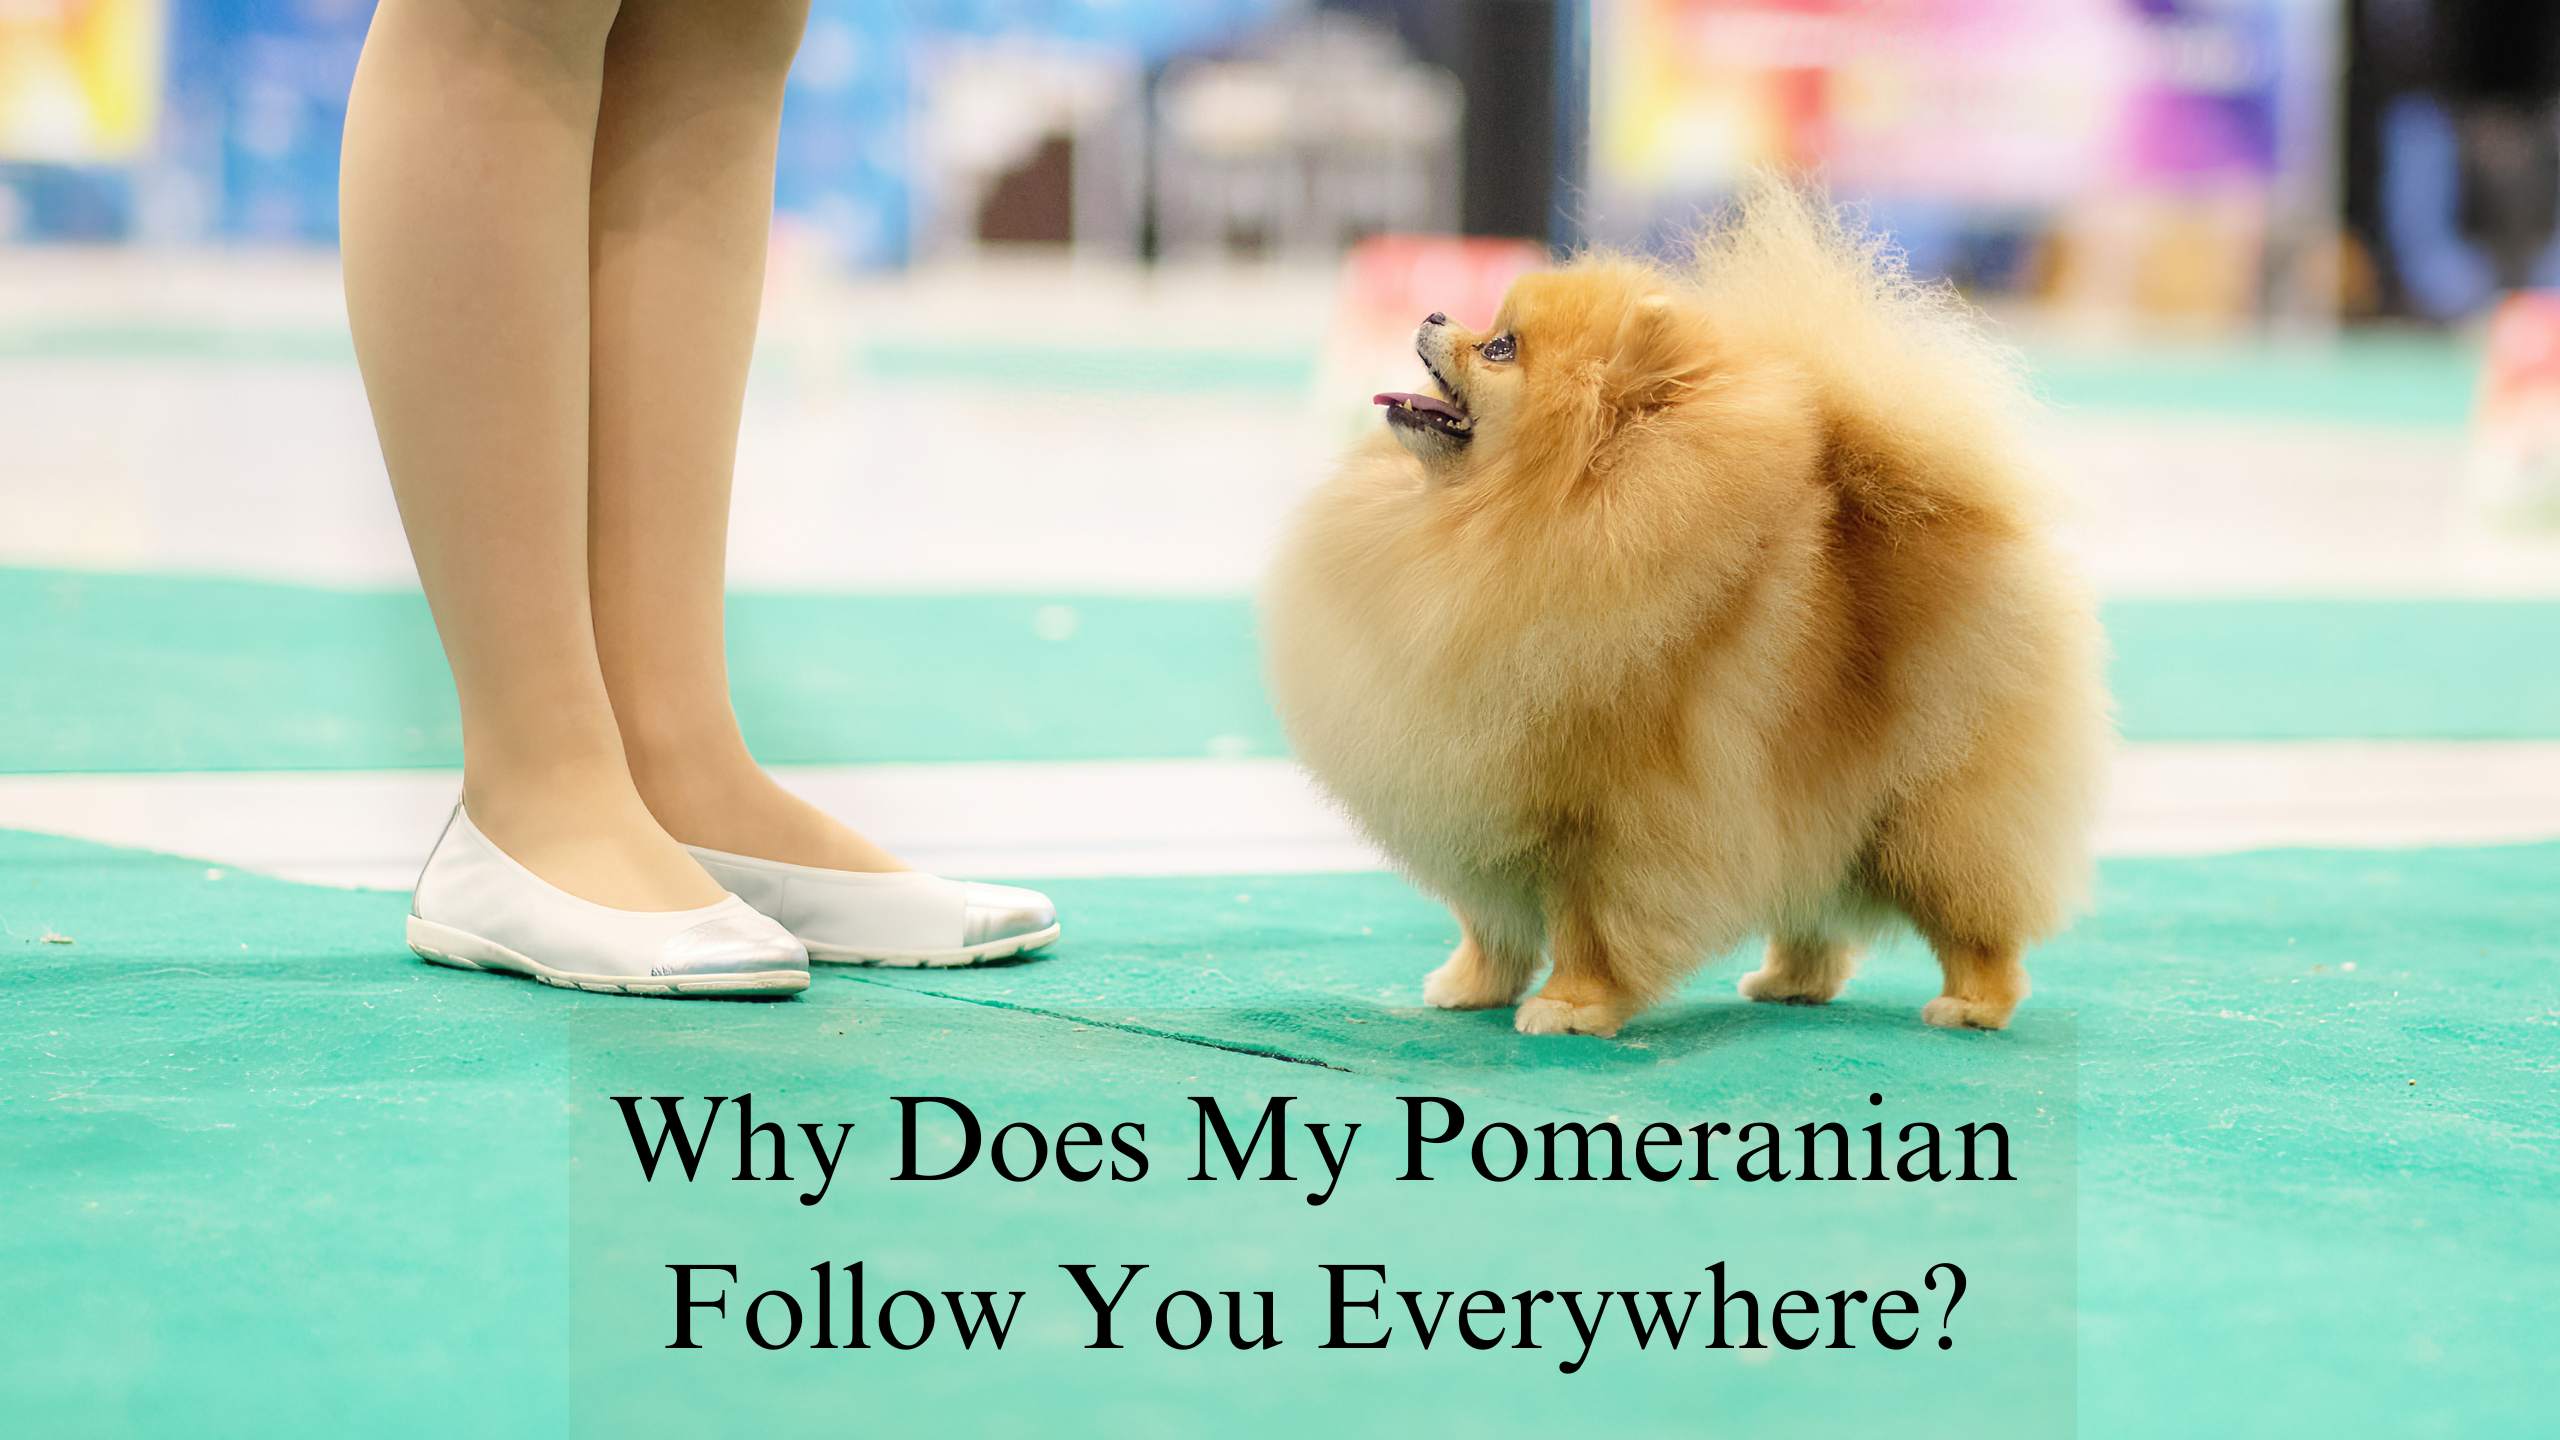 Why Does My Pomeranian Follow Me Everywhere?